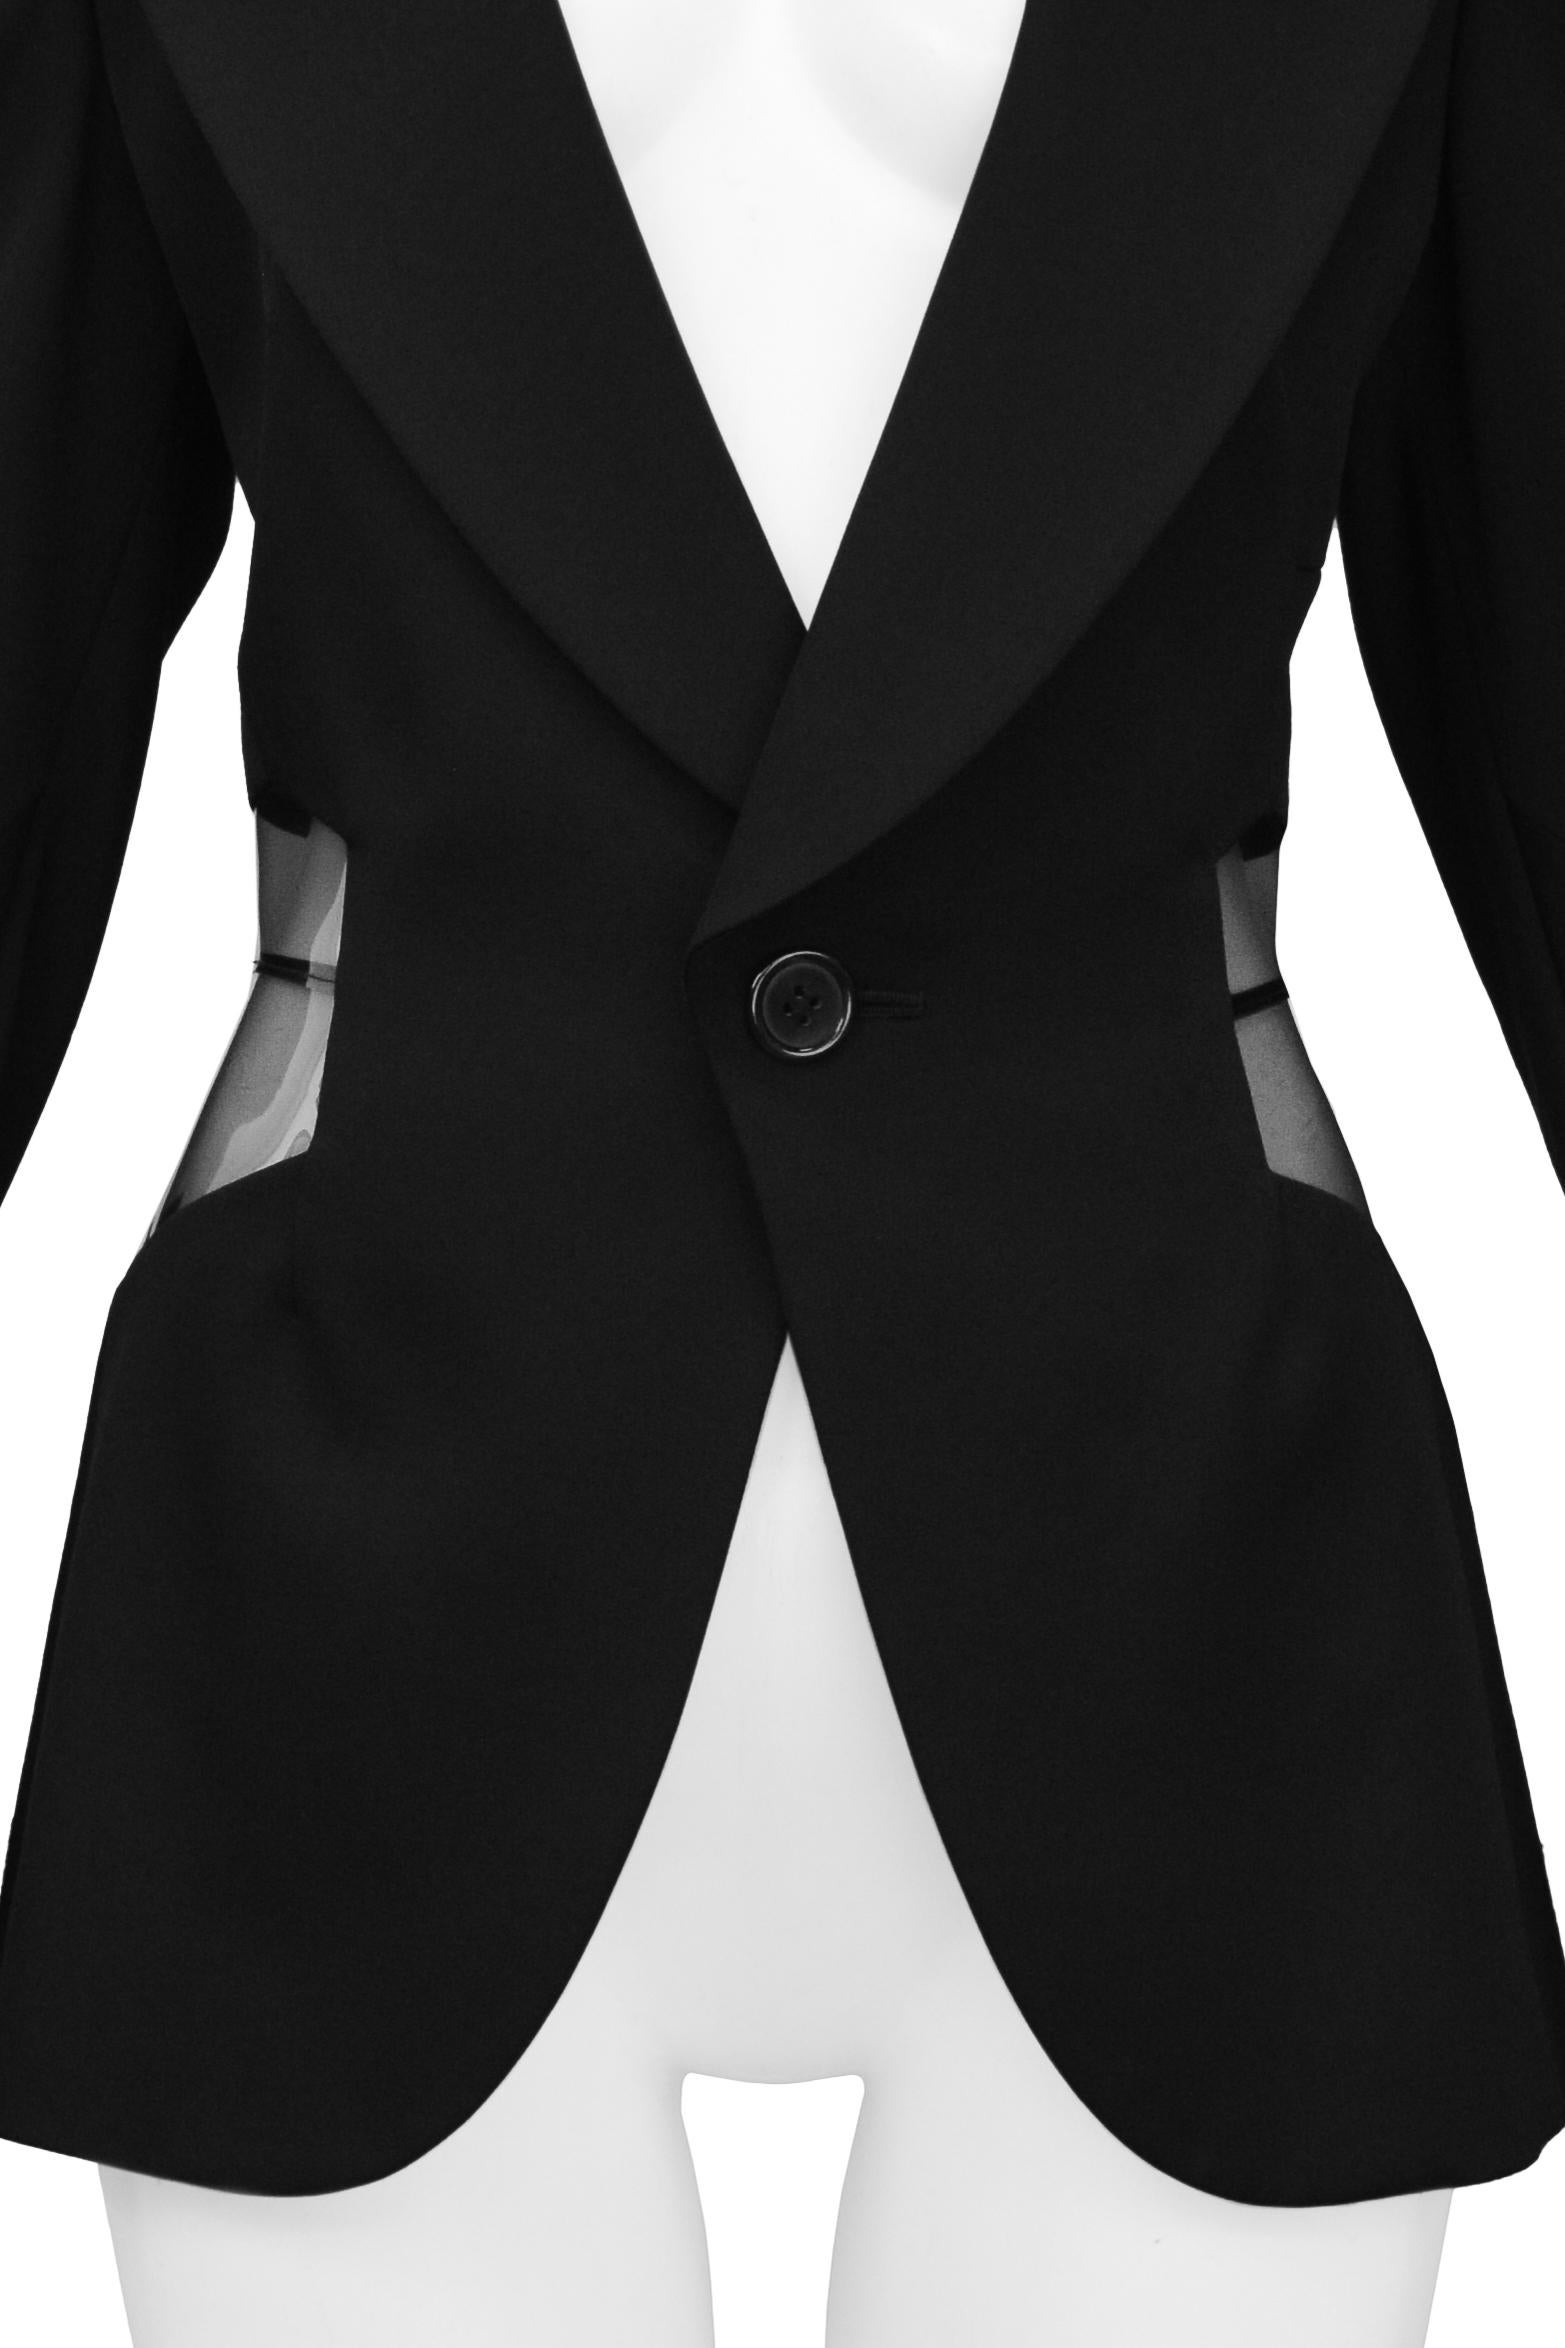 Junya Watanabe Black Blazer With Vinyl Insets 2005 In Excellent Condition For Sale In Los Angeles, CA